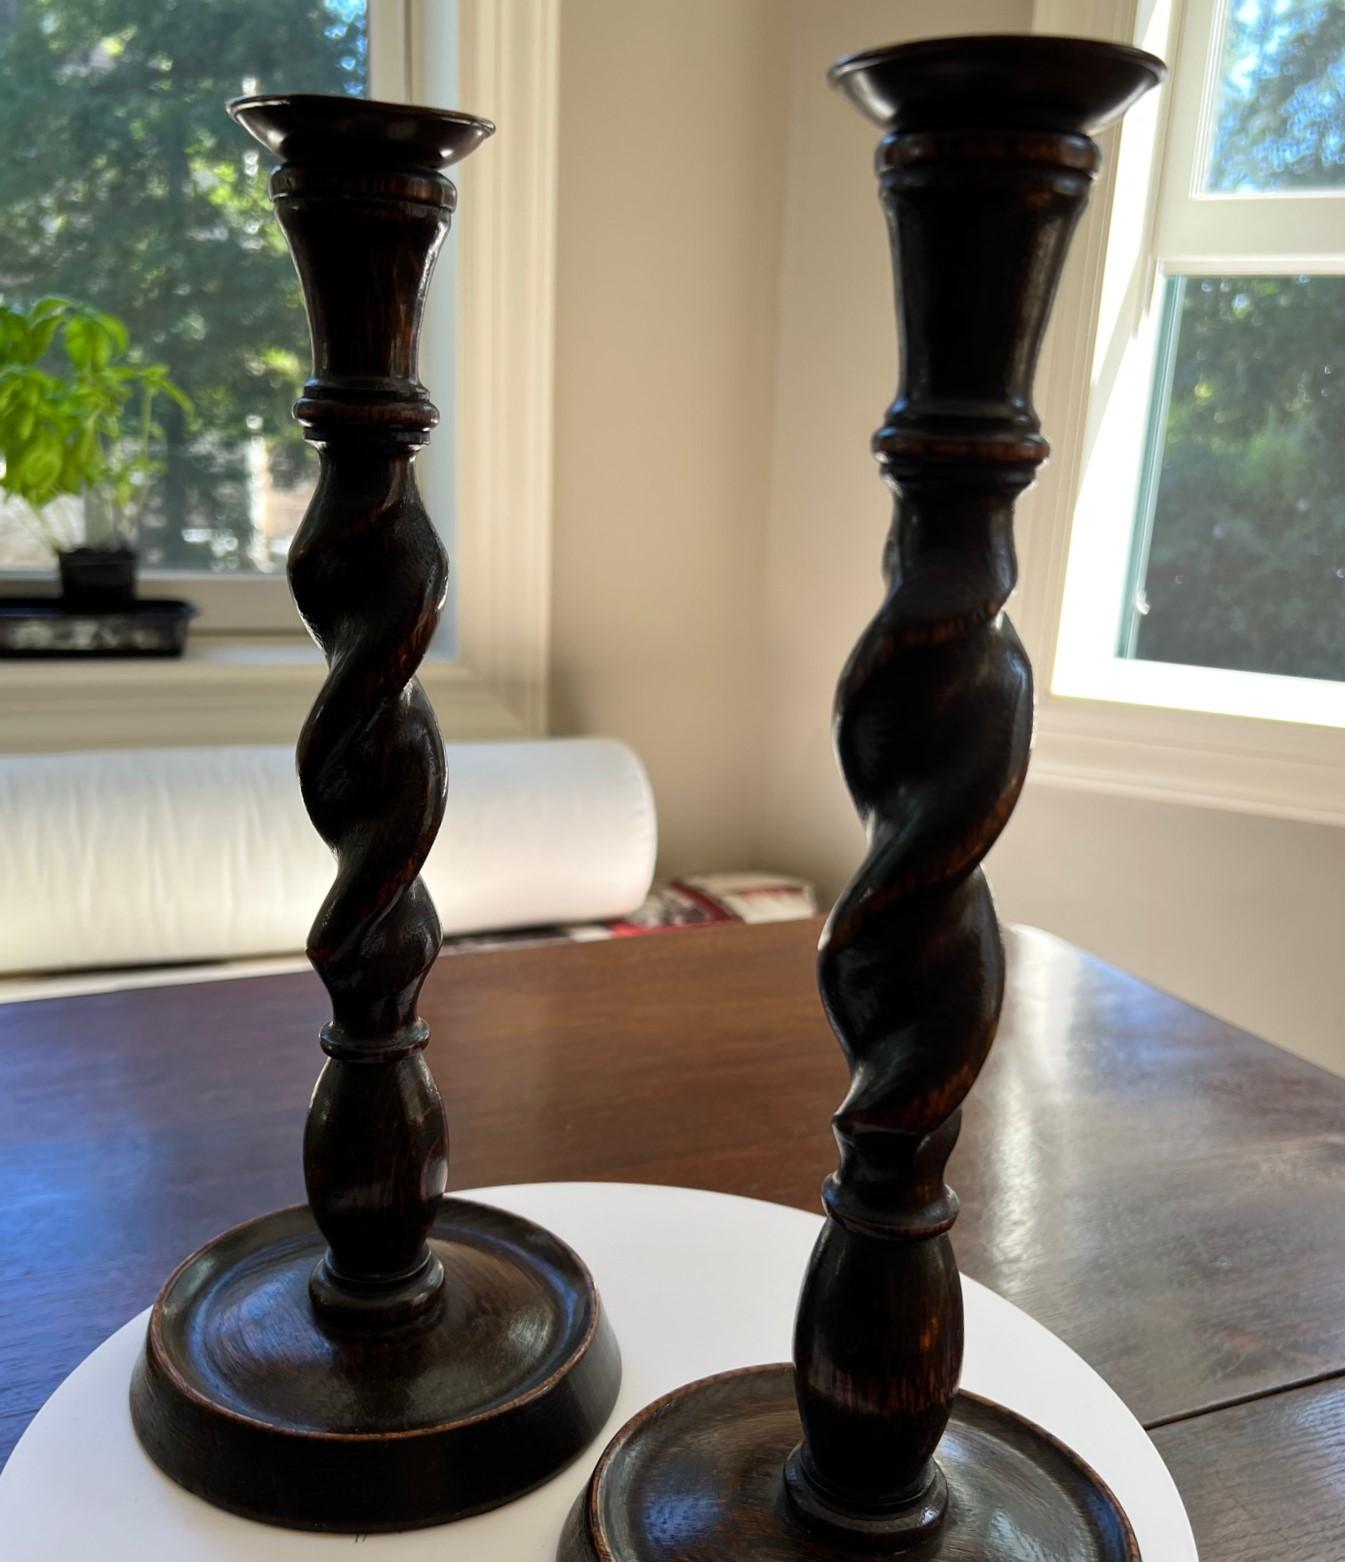 A pair of English Oak barley twist candlesticks from the Jacobean Revival period.  They would make a wonderful gift for the collector of English antiques. What a handsome addition to a country house decor, a library or guest bedroom. We all know